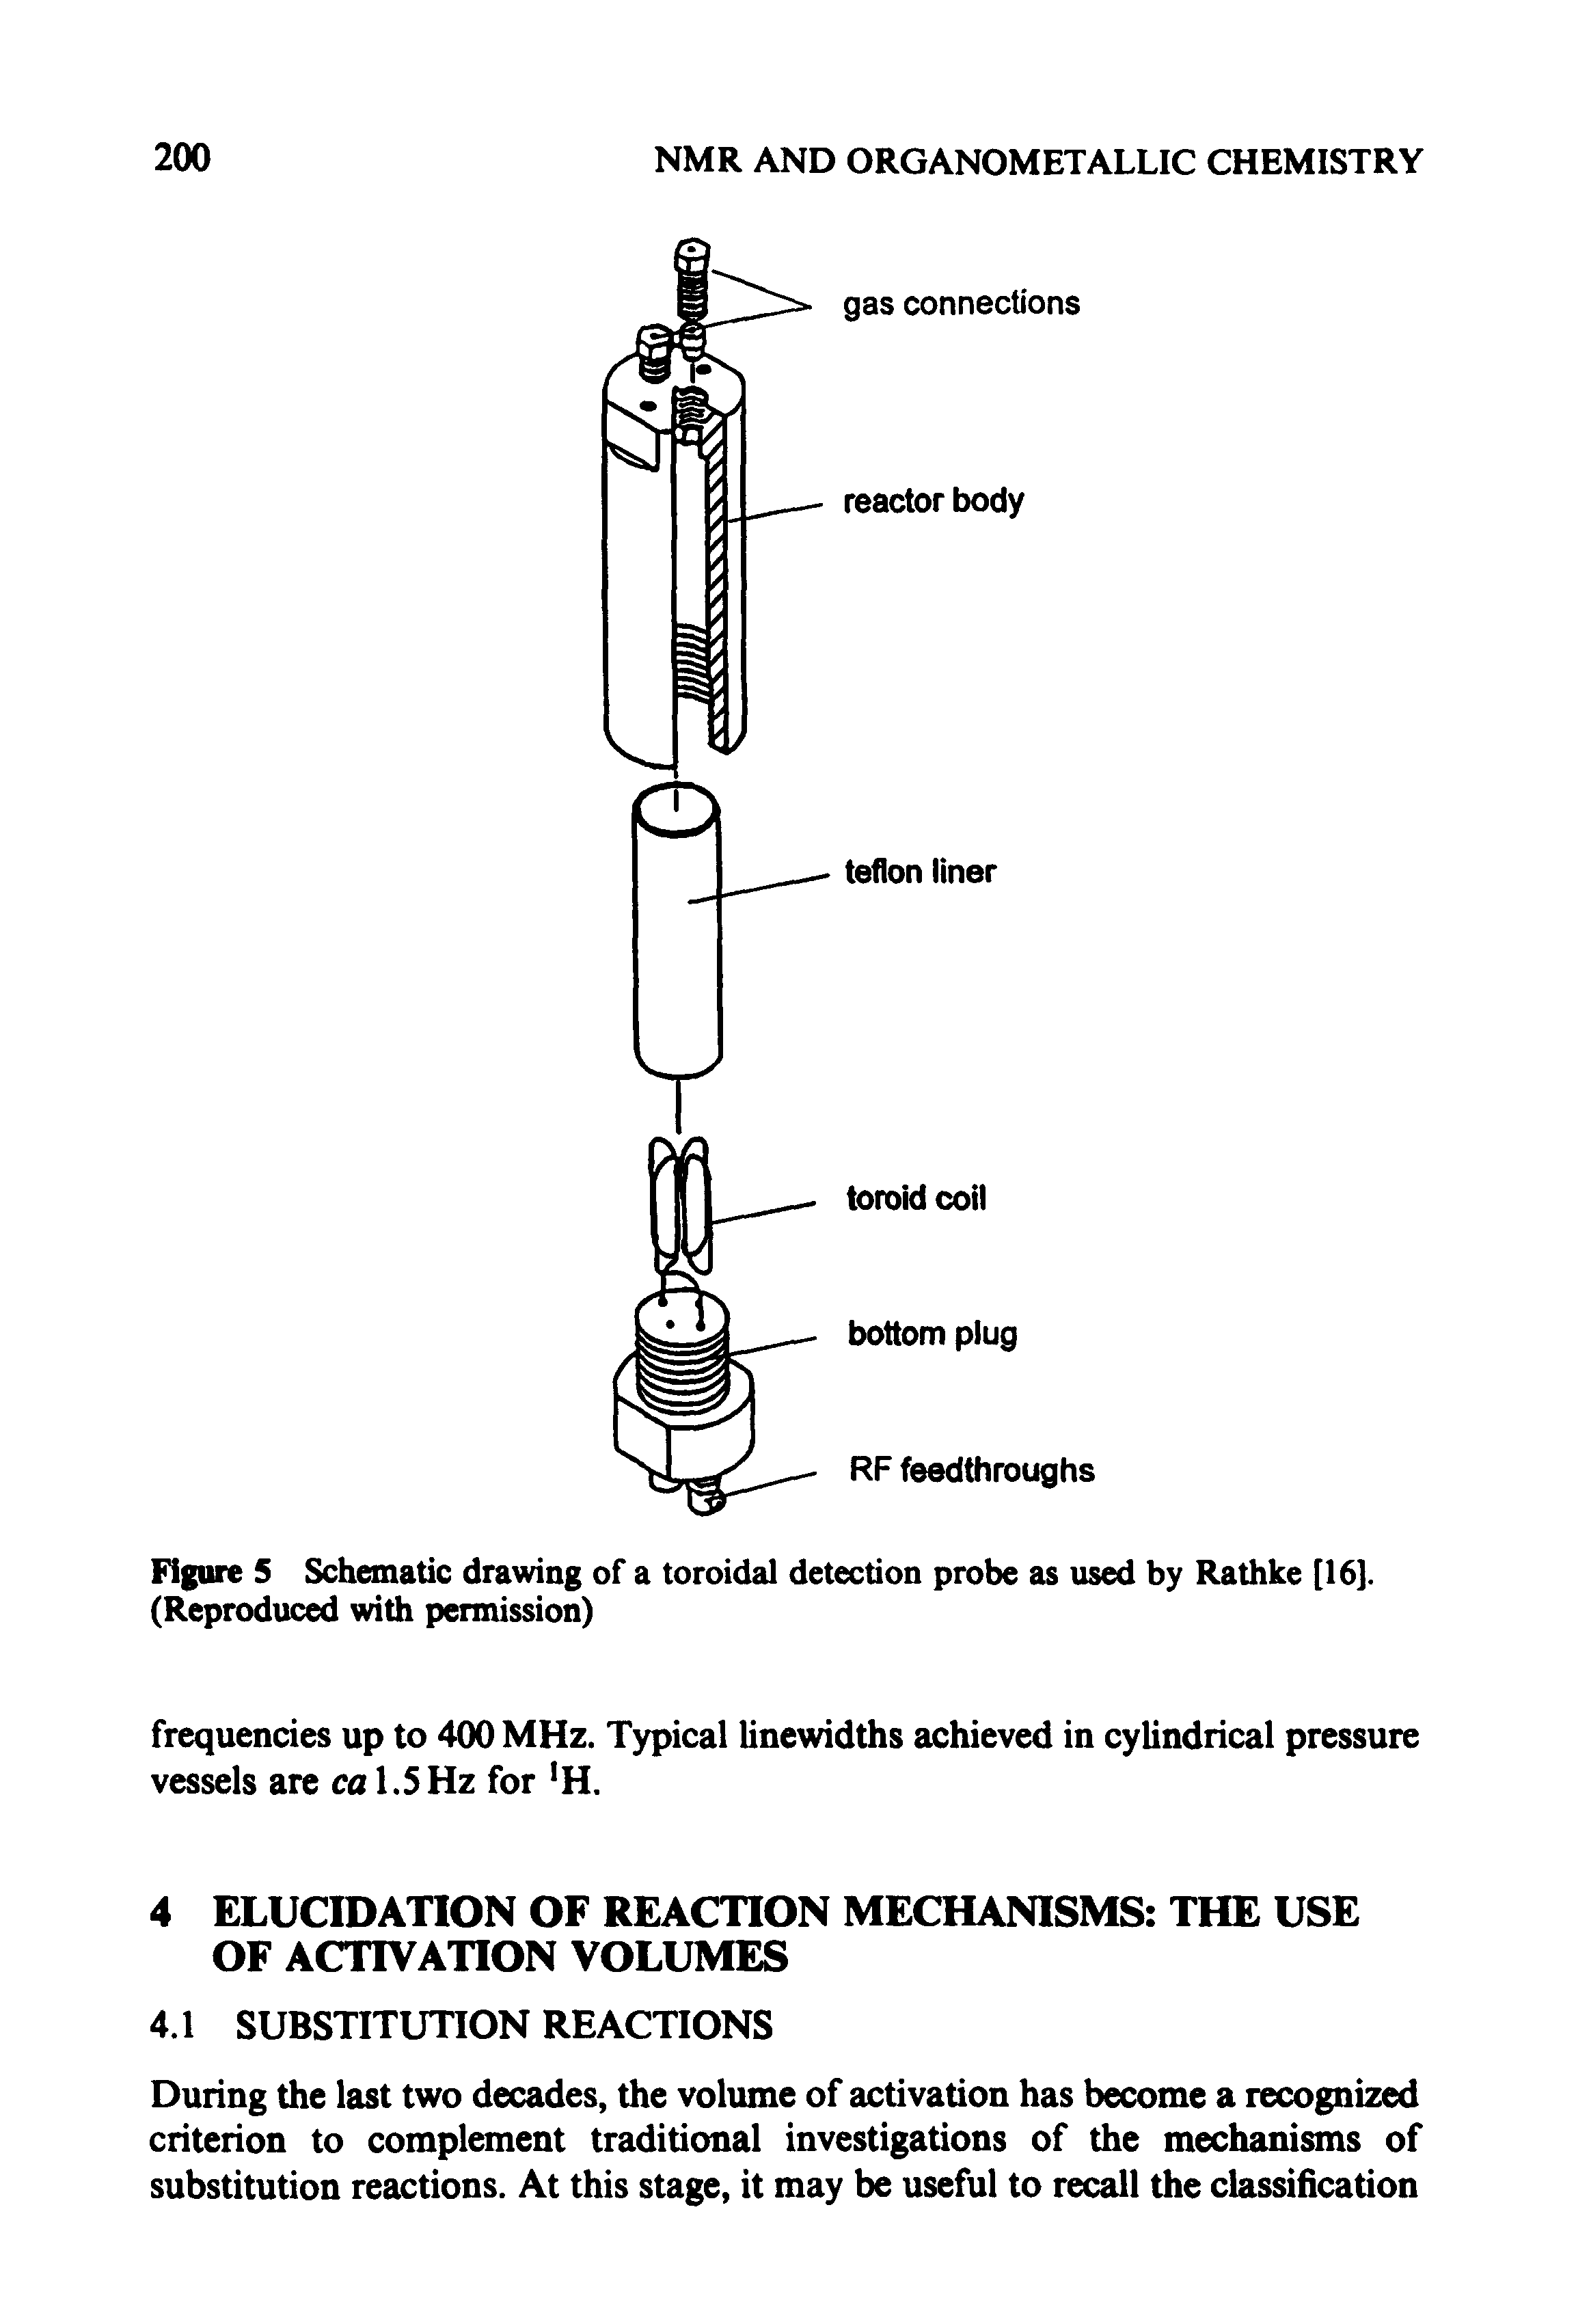 Figure 5 Schematic drawing of a toroidal detection probe as used by Rathke [16]. (Reproduced with permission)...